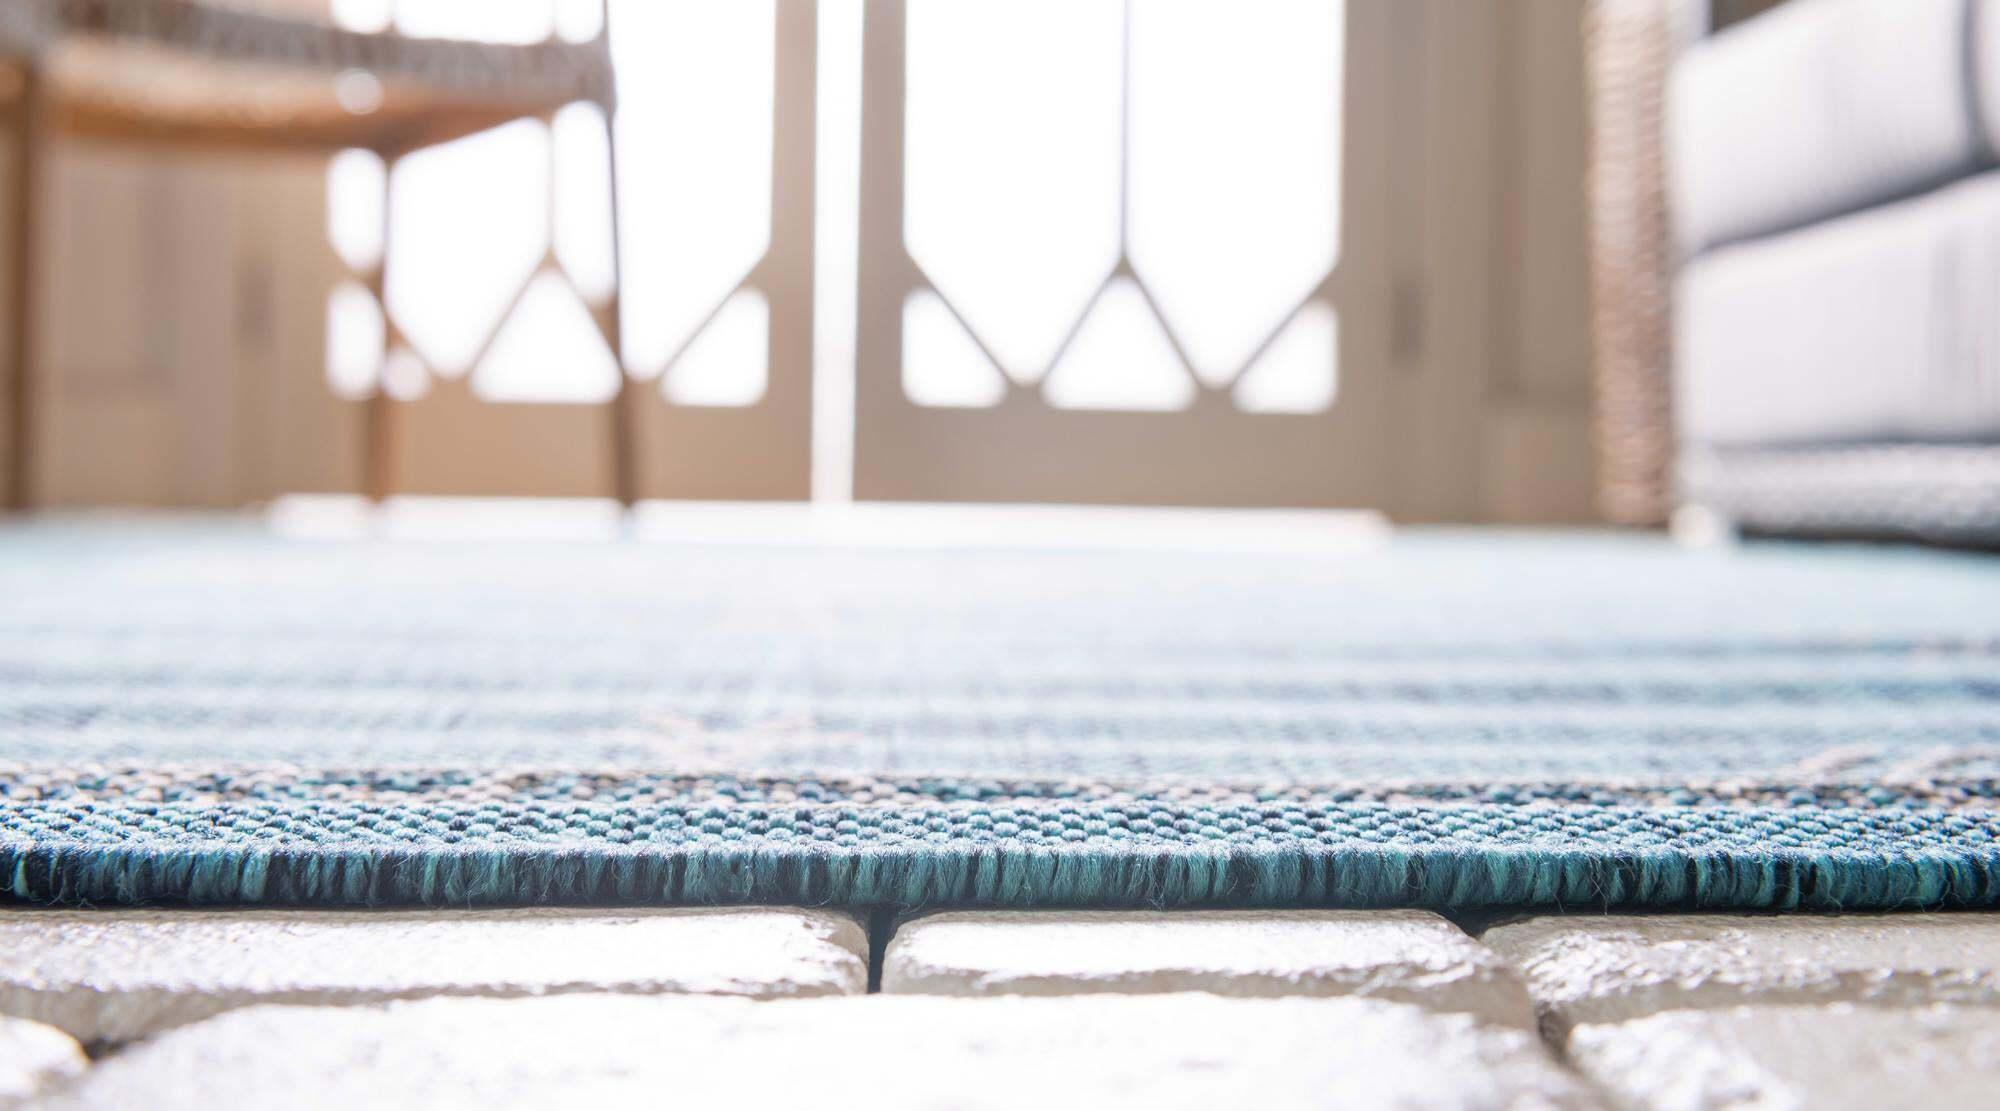 Unique Loom Outdoor Rugs - Outdoor Traditional Medallion Rectangular 9x12 Rug Teal & Ivory